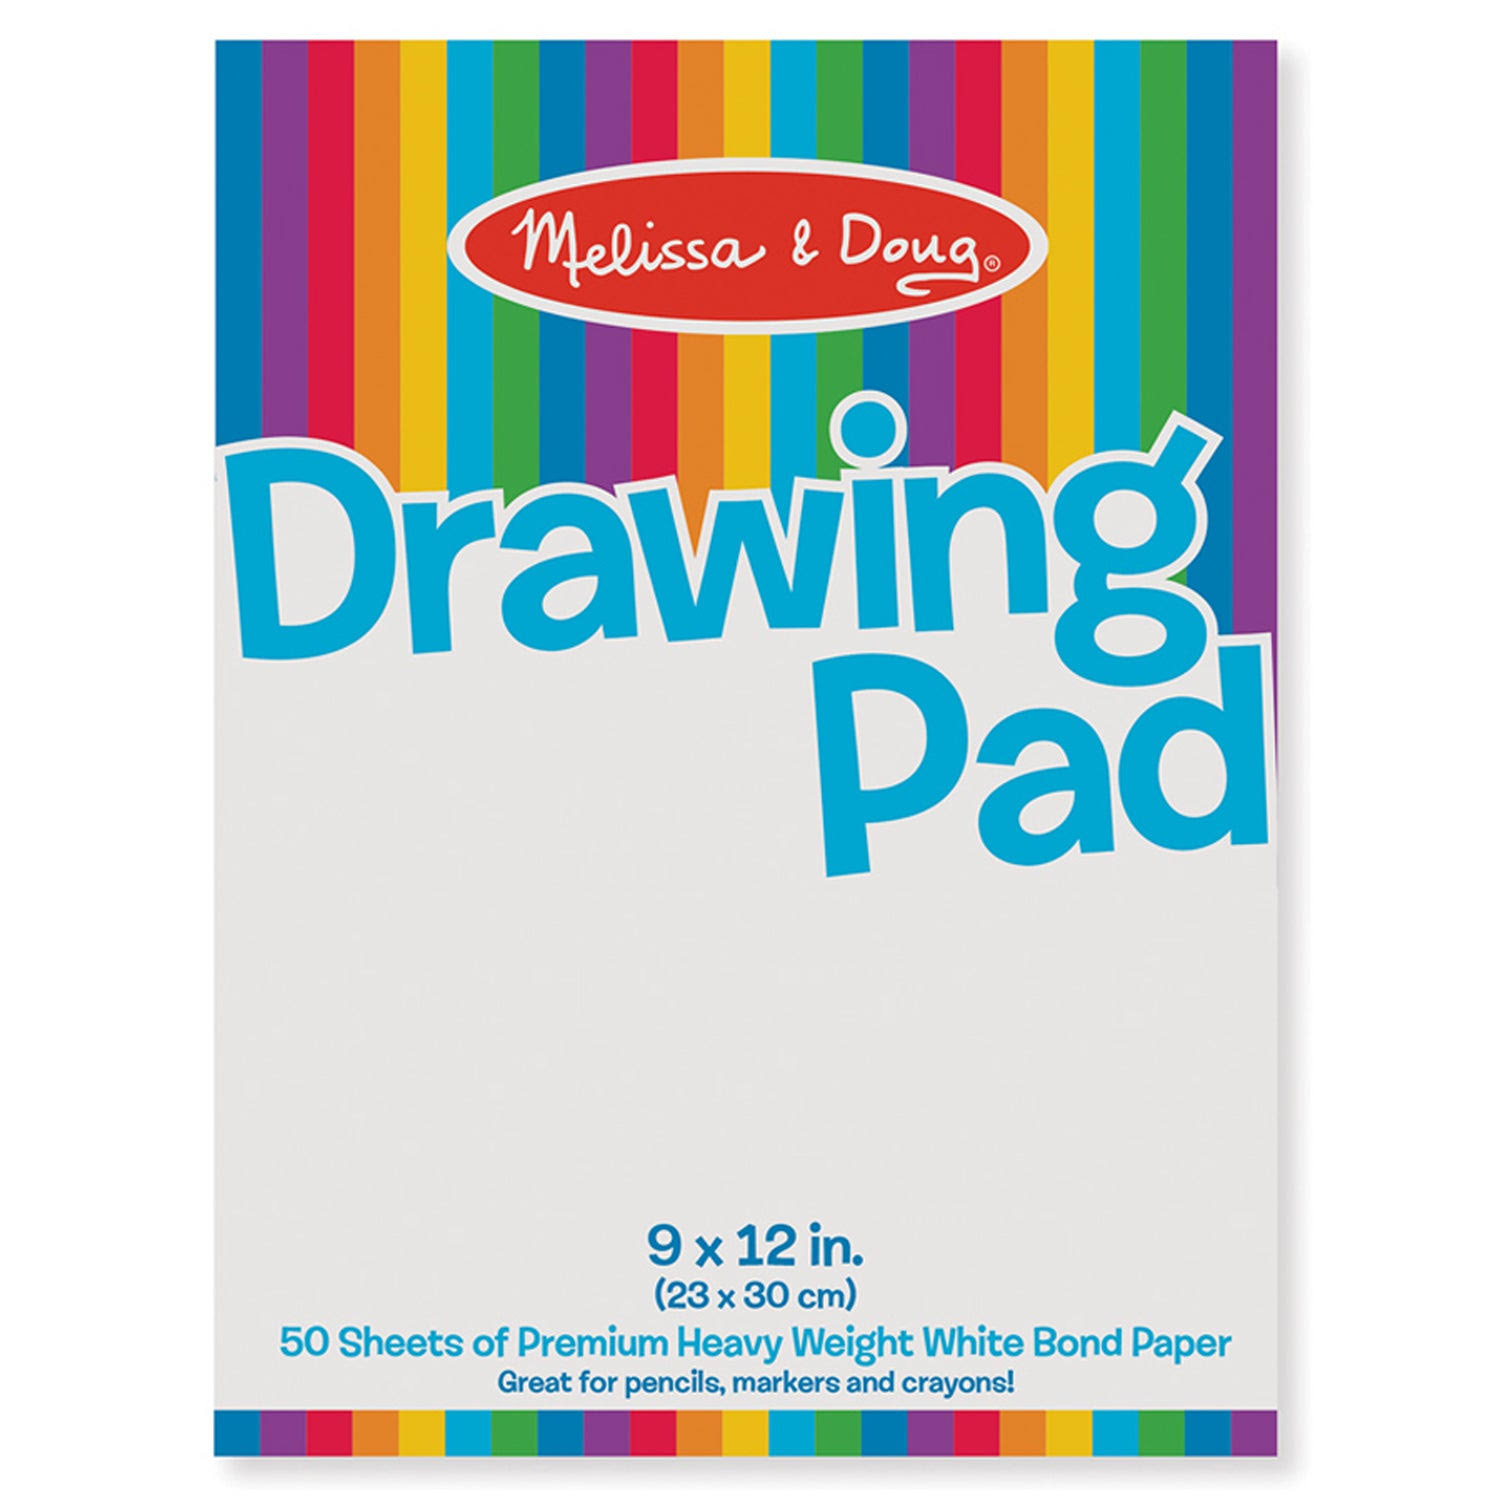 Melissa & Doug Drawing Paper Pad - 9in x 12in